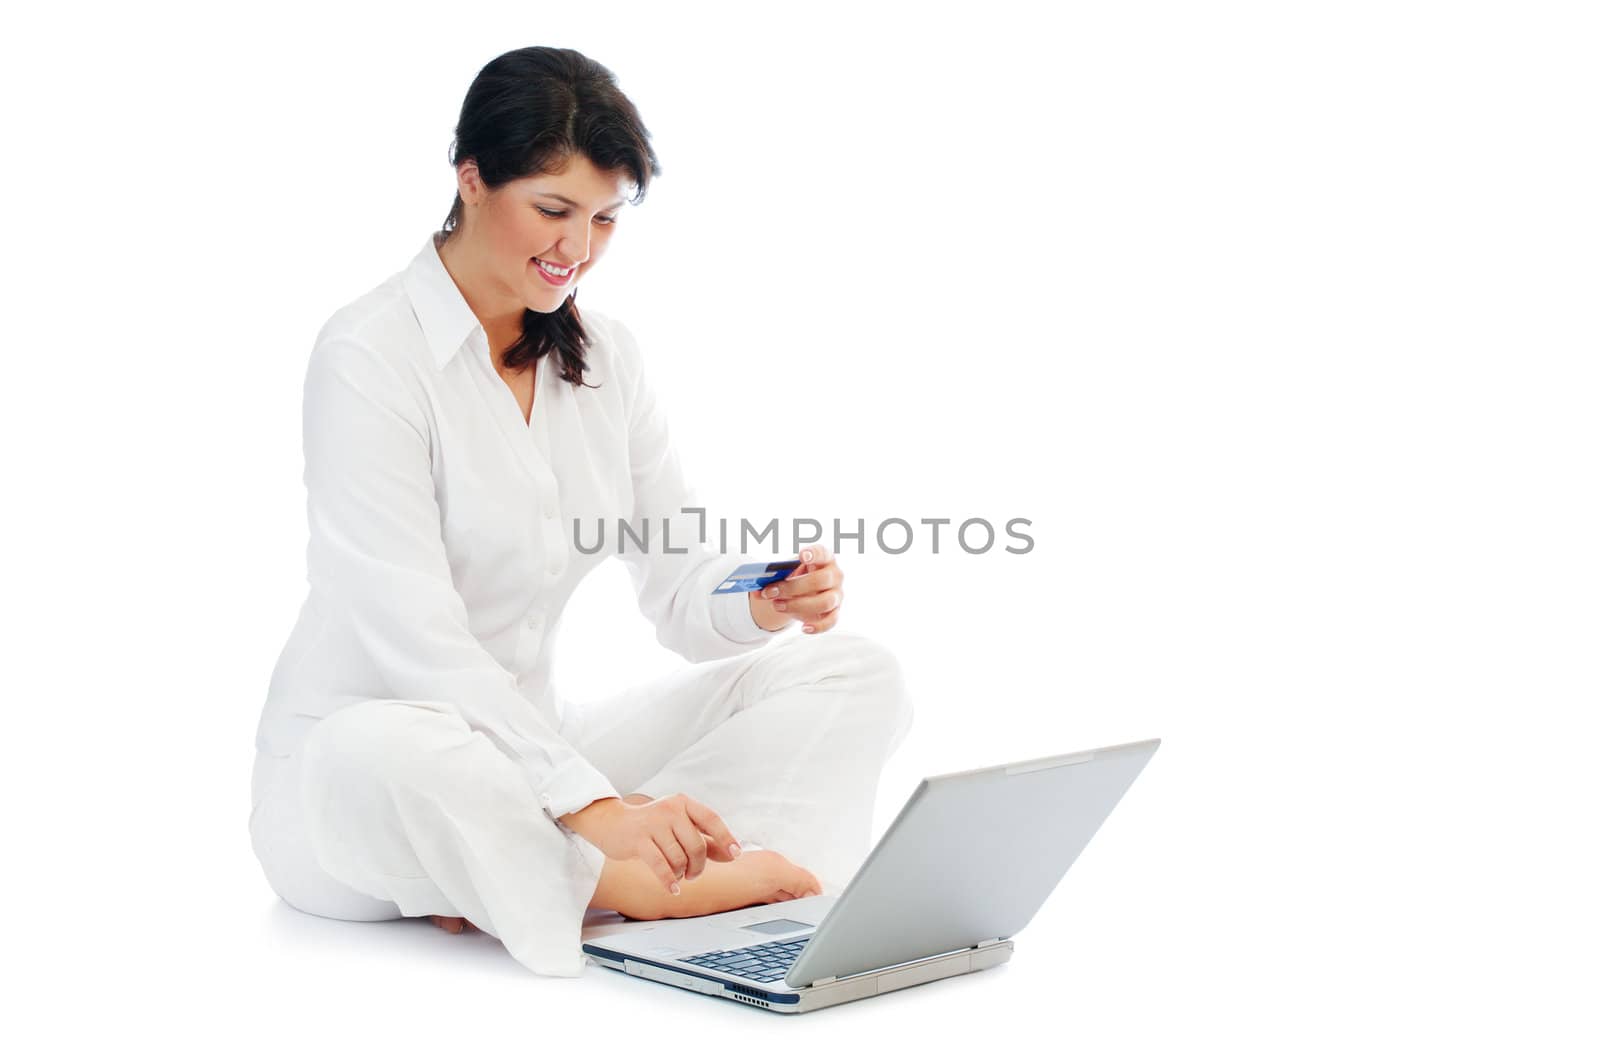 Smiling young woman with credit card and laptop isolated